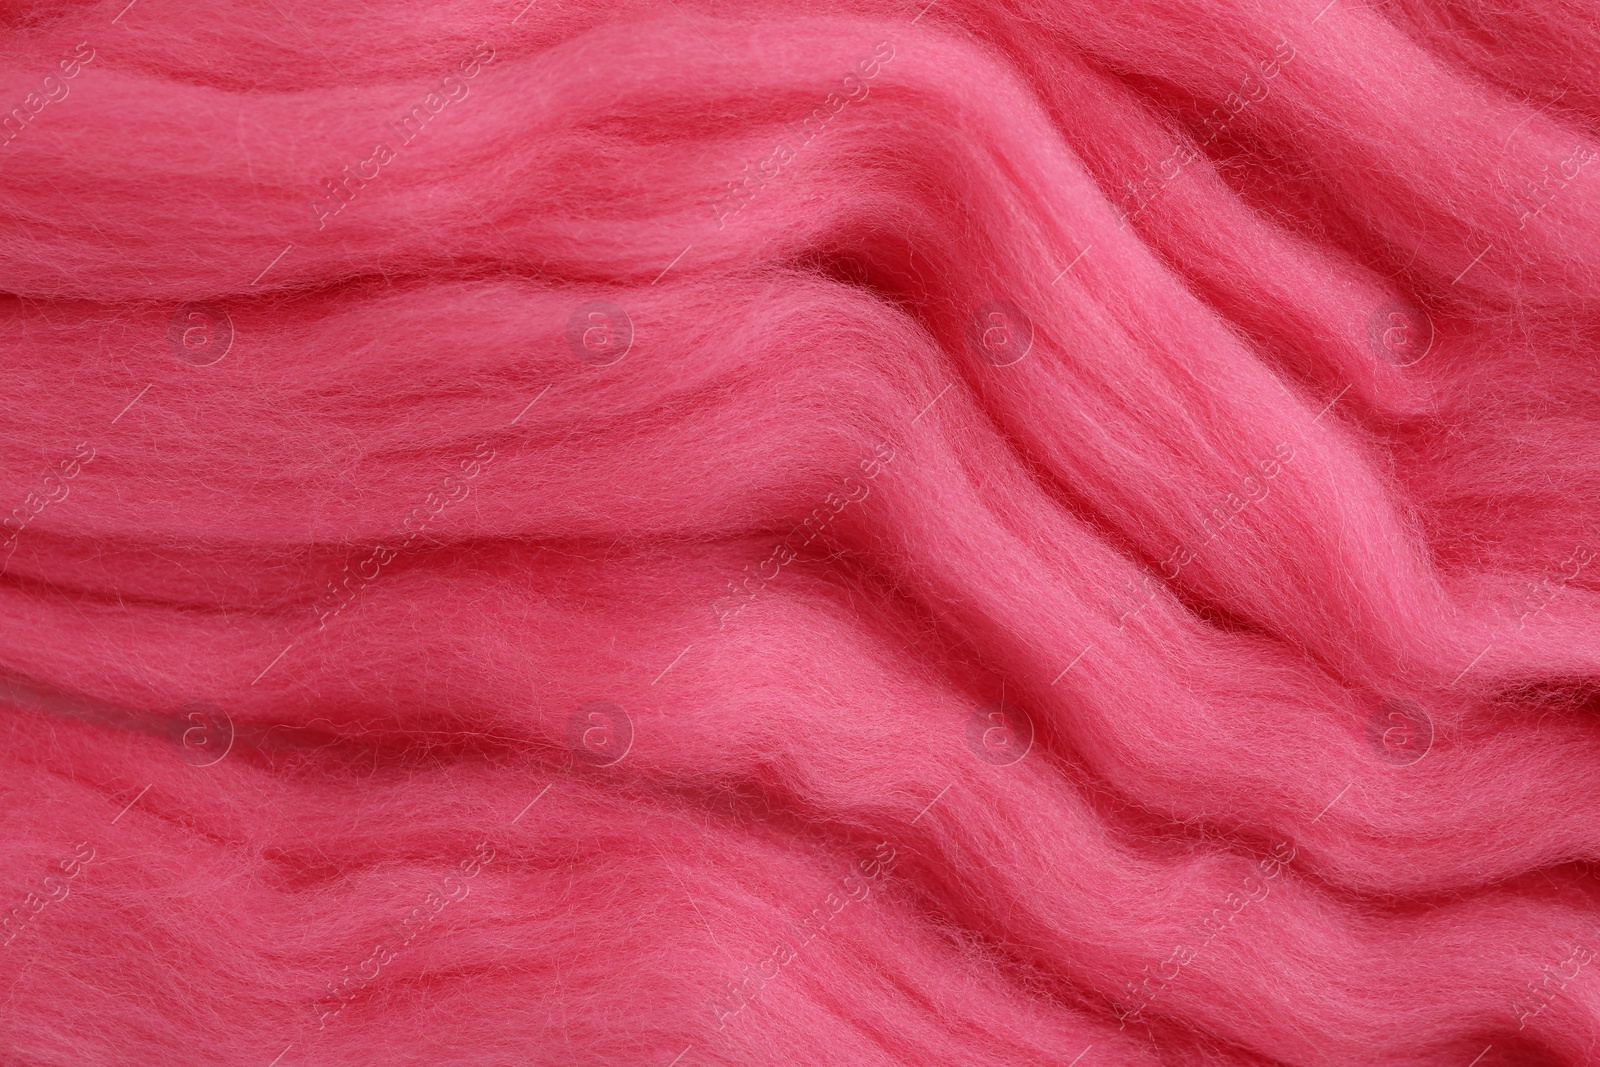 Photo of Pink felting wool as background, closeup view